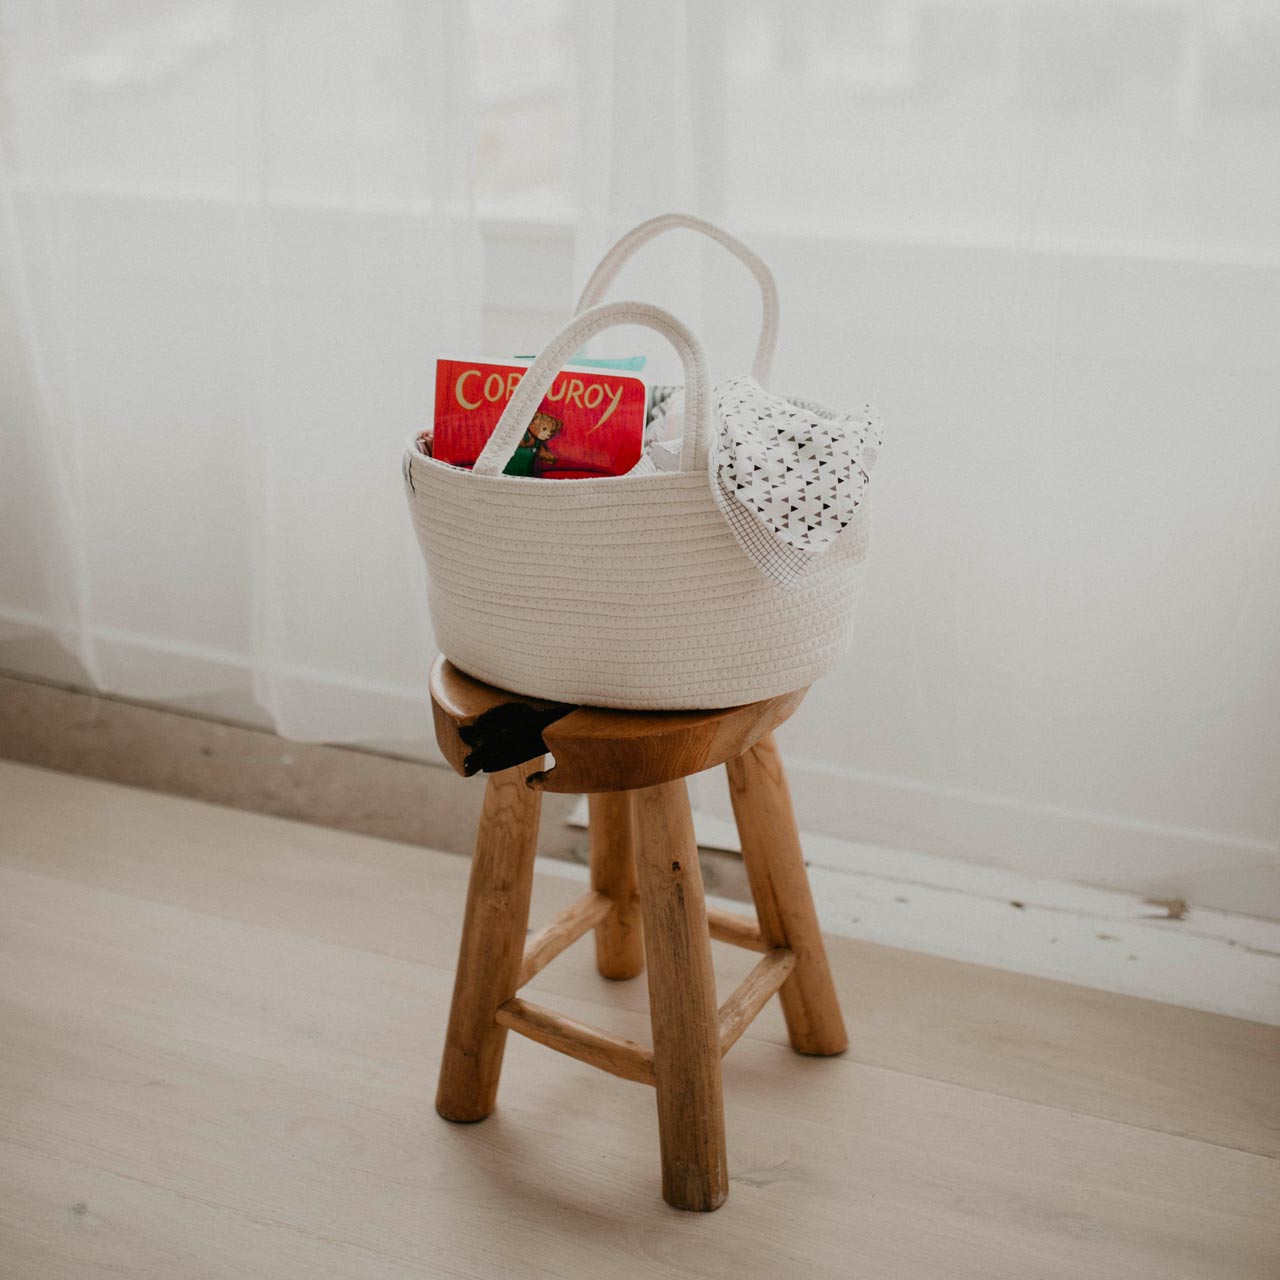 Rope Diaper Caddy on stool